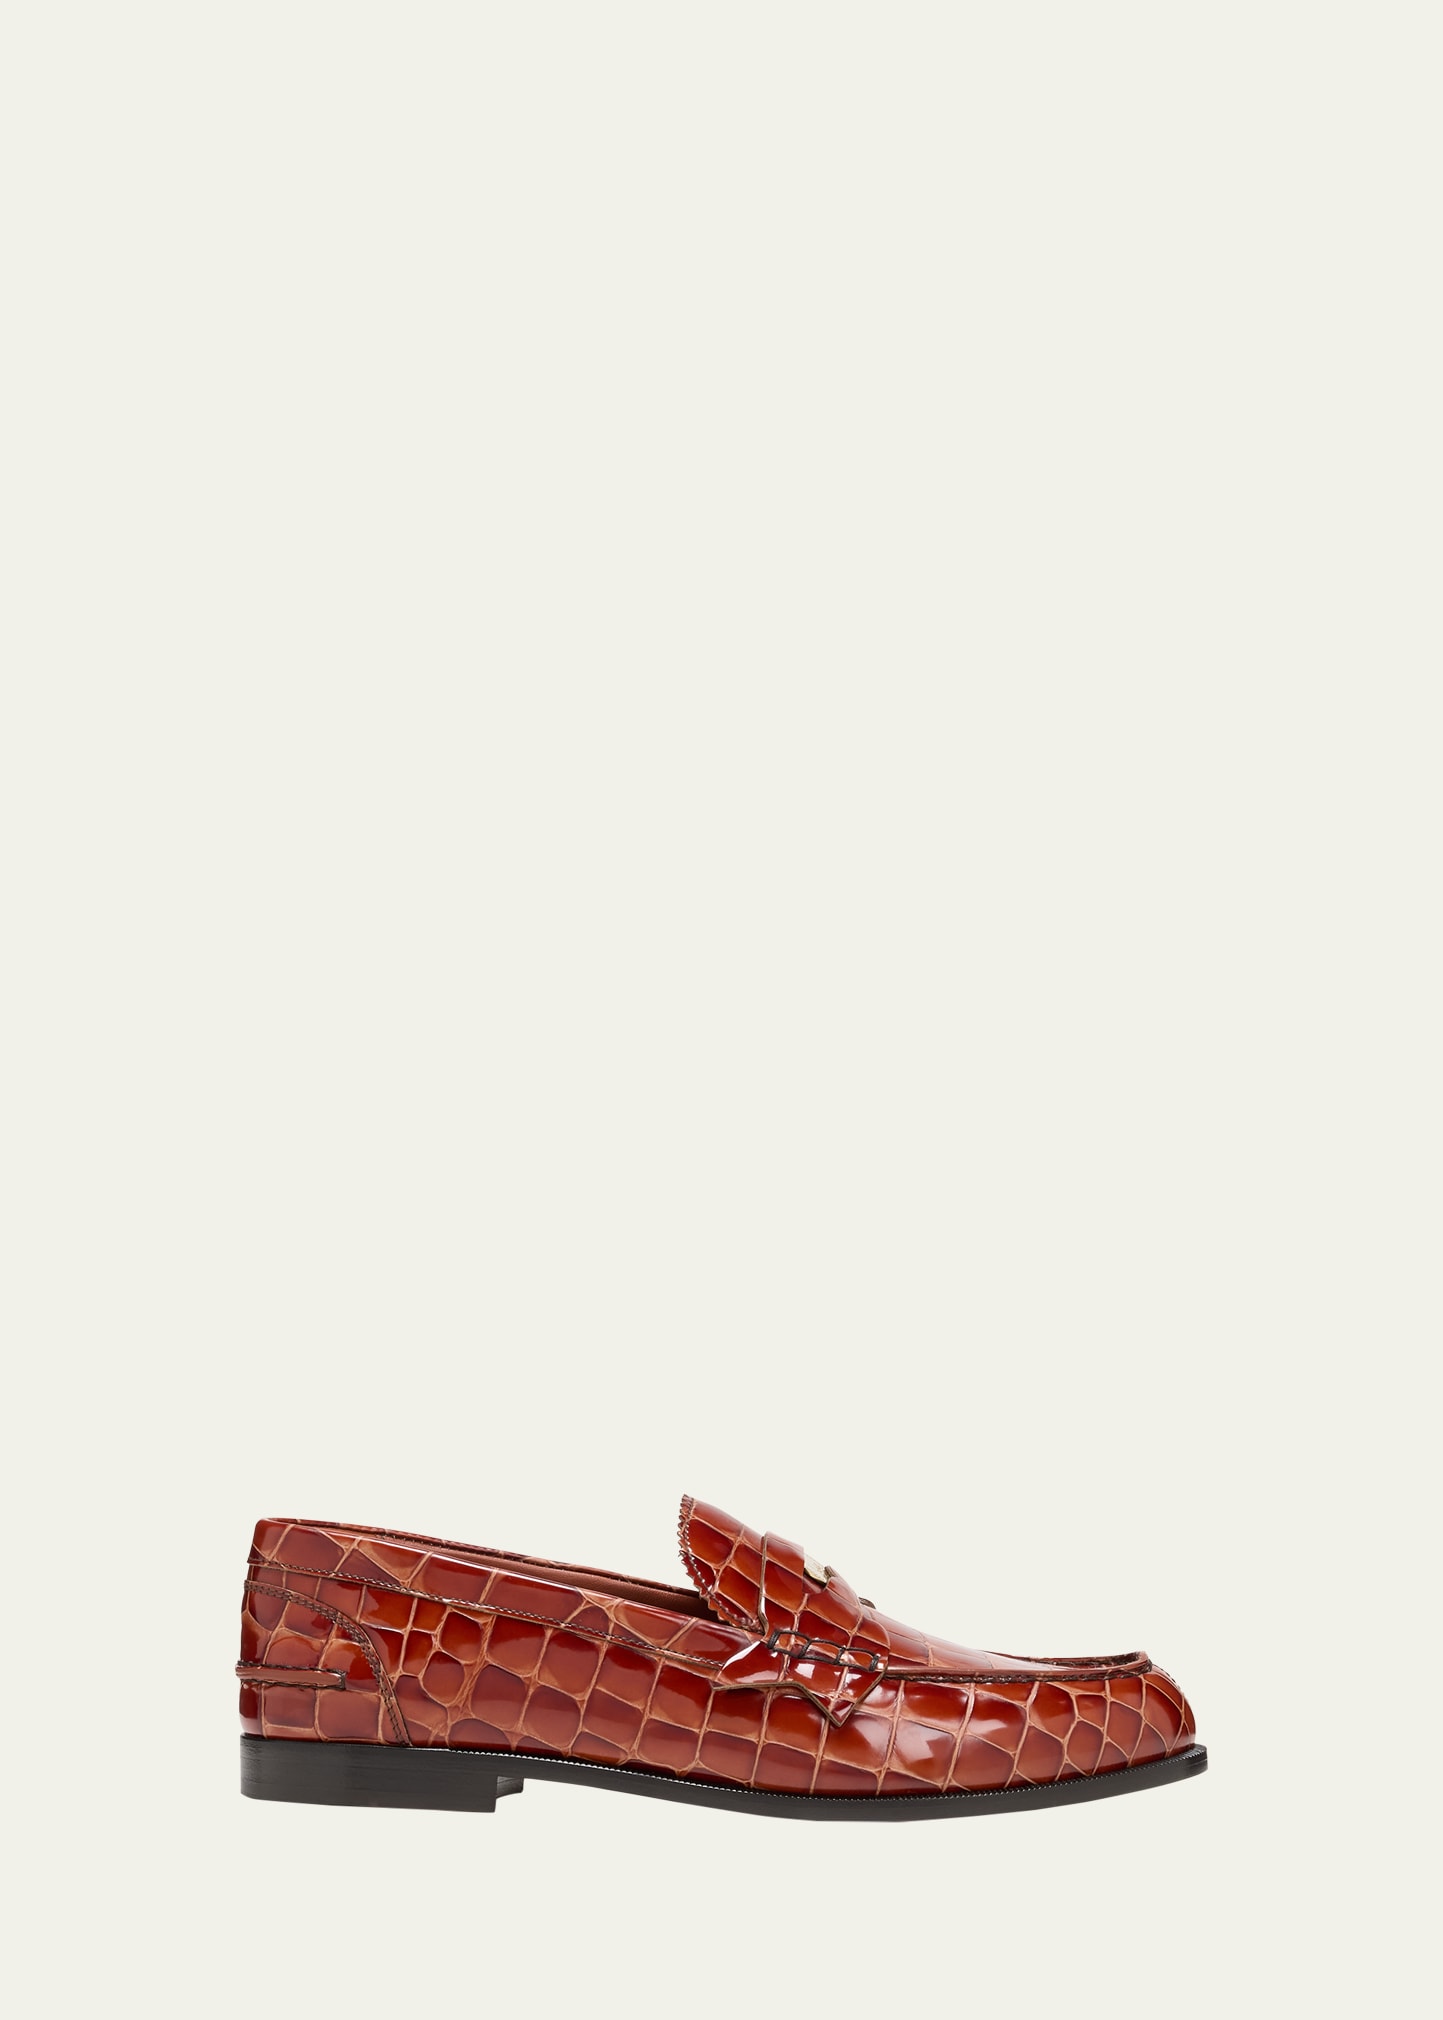 MJ Croco Chain Red Sole Heeled Loafers